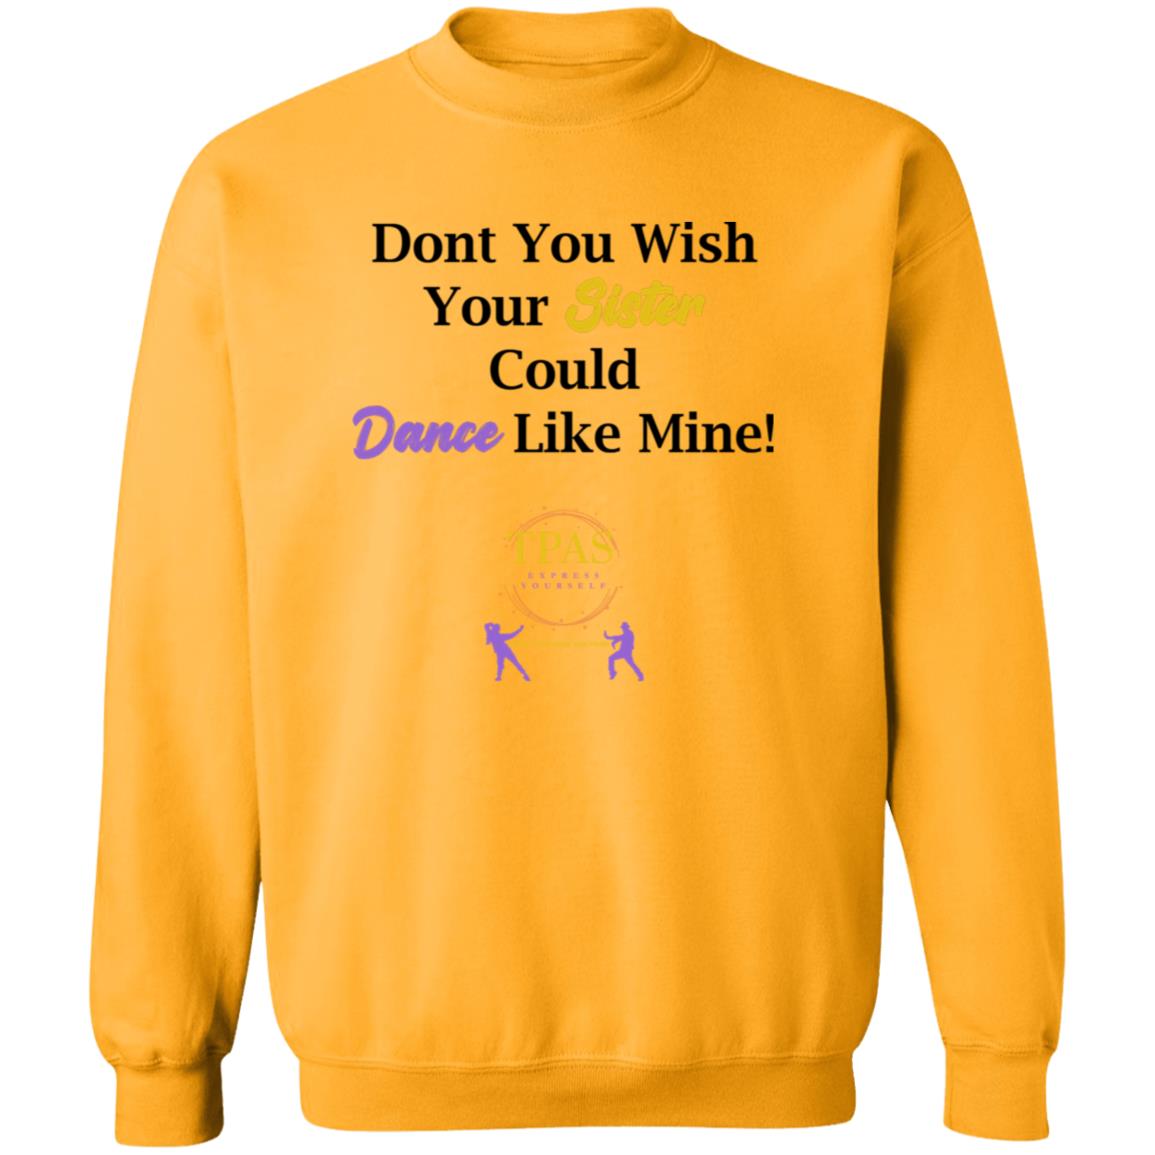 TPAS Wish Your Sister Could Dance Like Mine Crewneck Pullover Sweatshirt